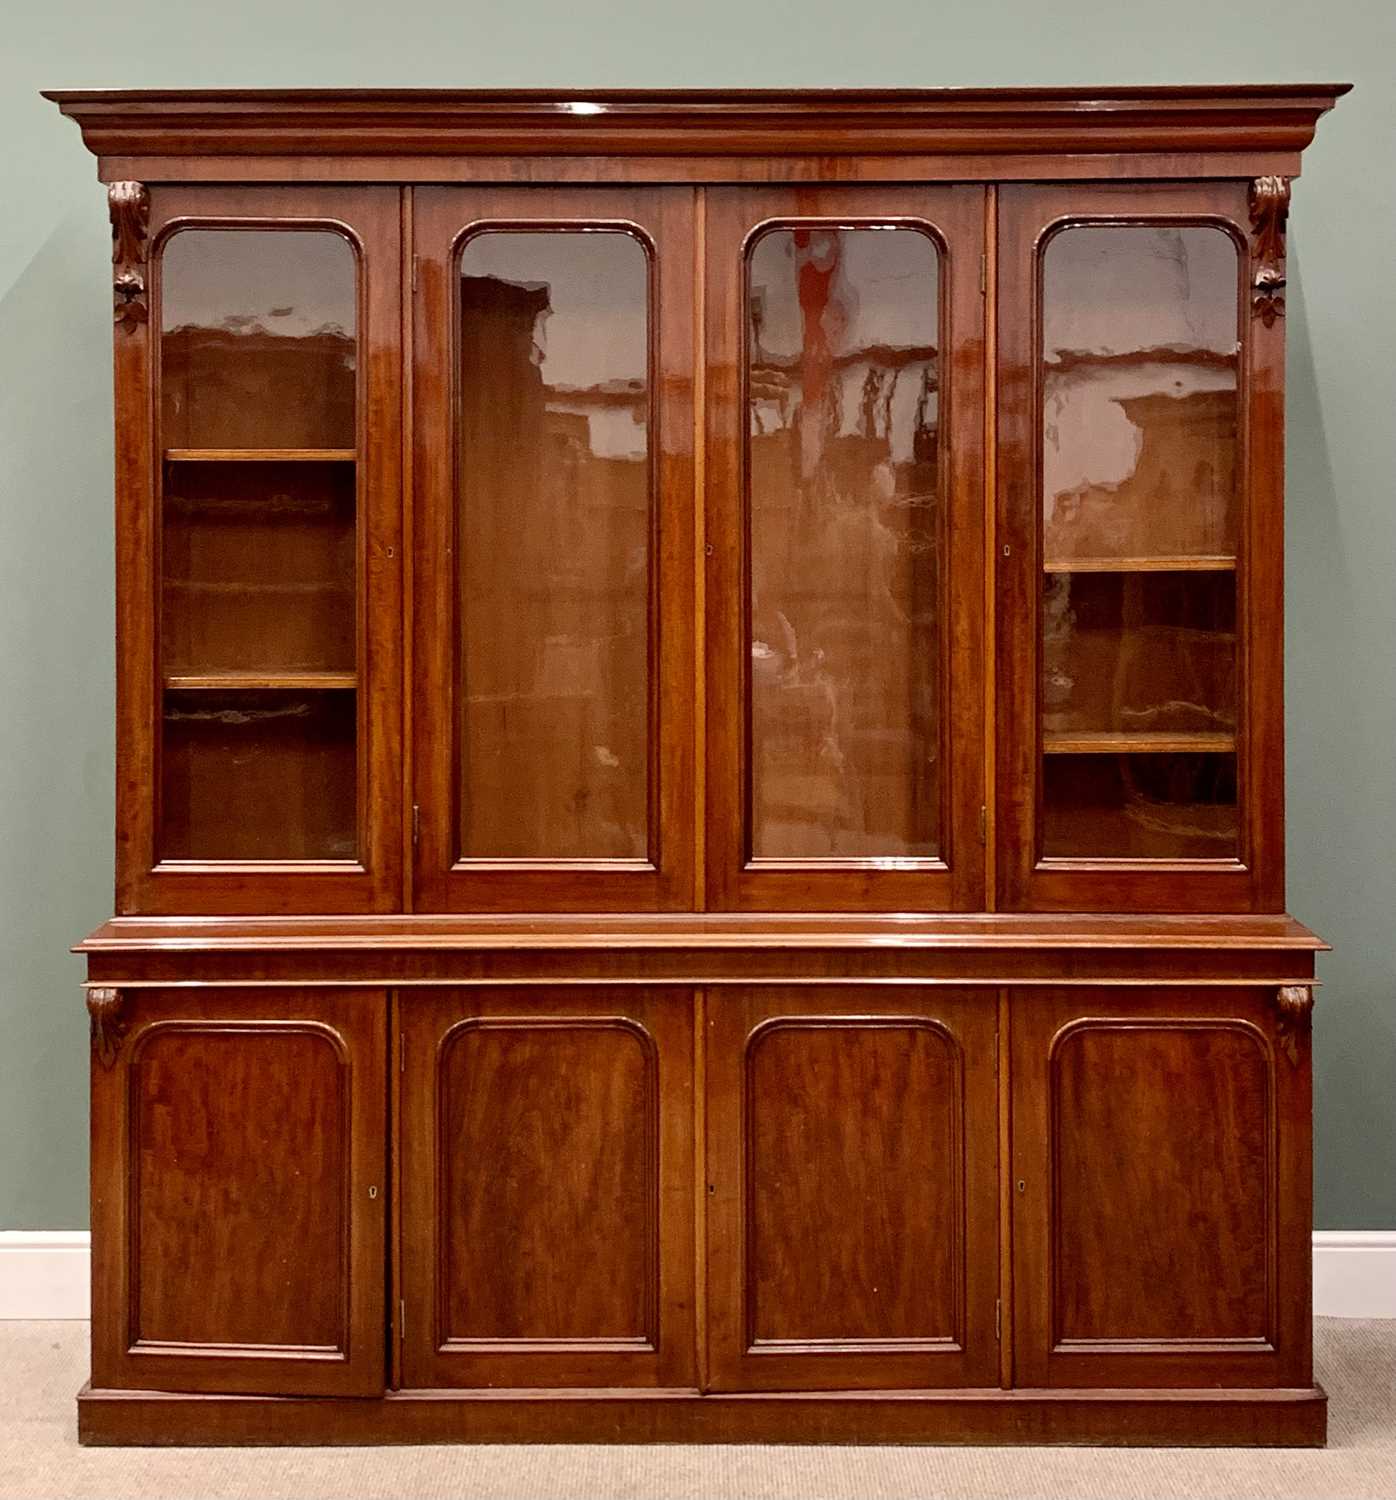 VICTORIAN MAHOGANY FOUR-DOOR BOOKCASE CUPBOARD, extremely well presented, having a stepped cornice